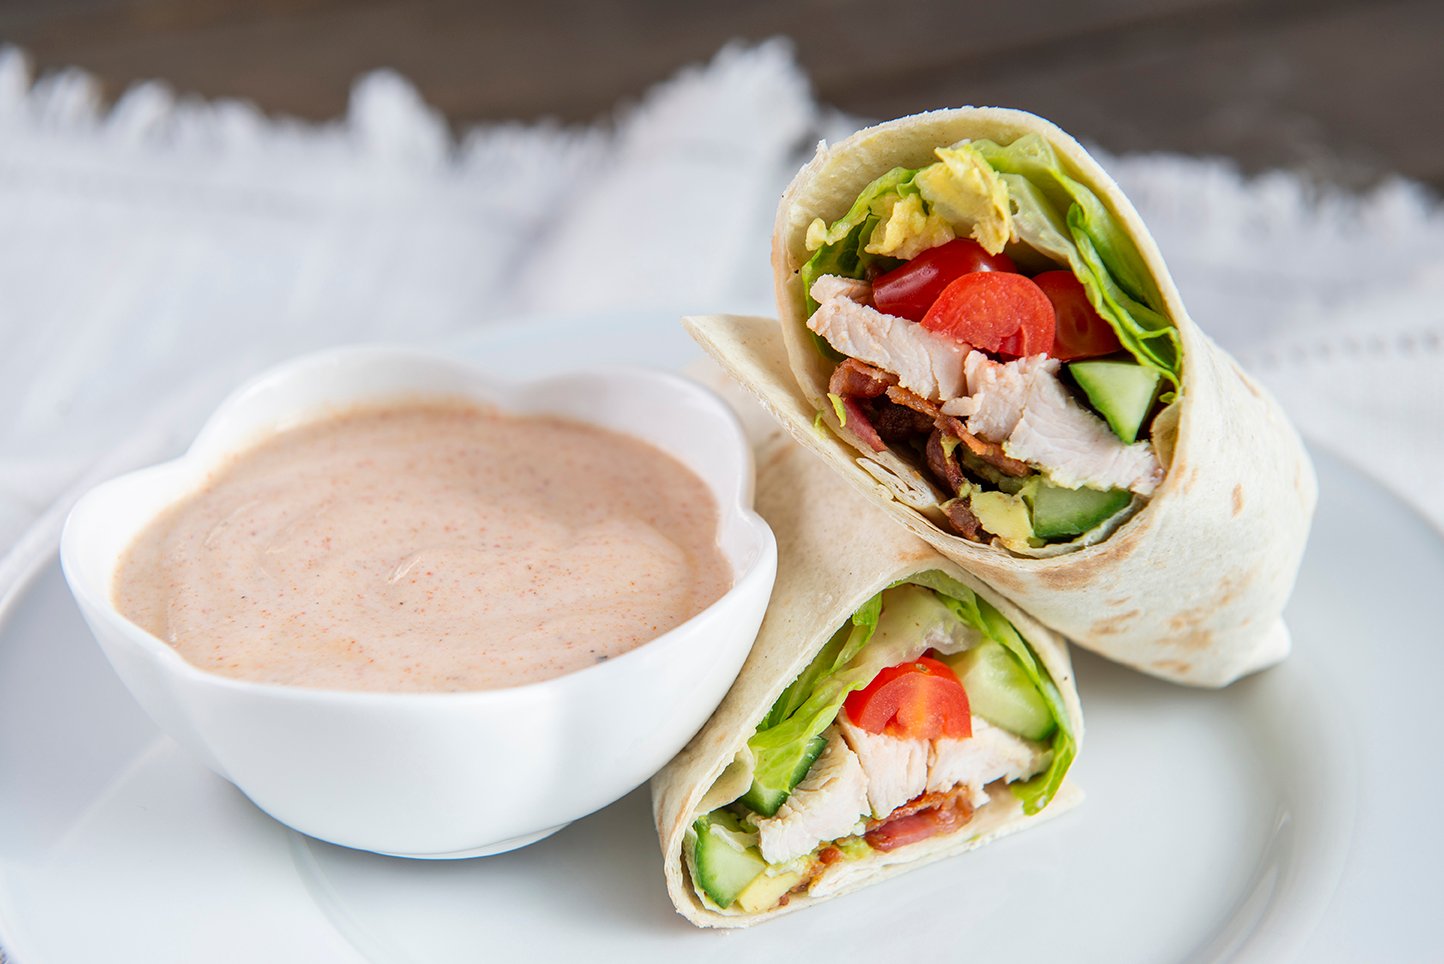 California Chicken BLT Wraps (with delicious dipping sauce!)